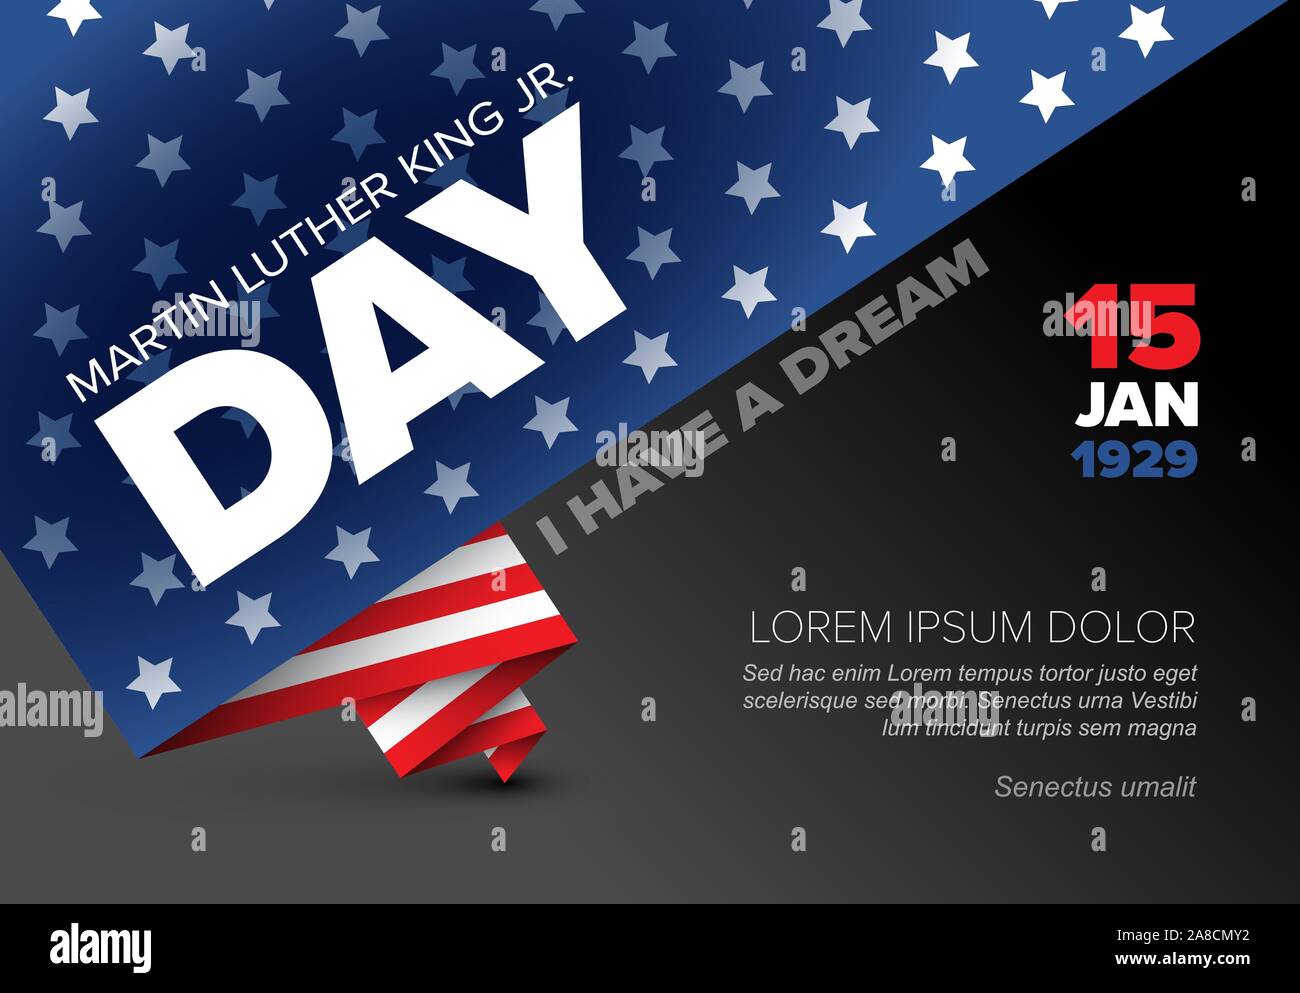 Martin Luther King jr. day poster template layout with place for your text Stock Vector